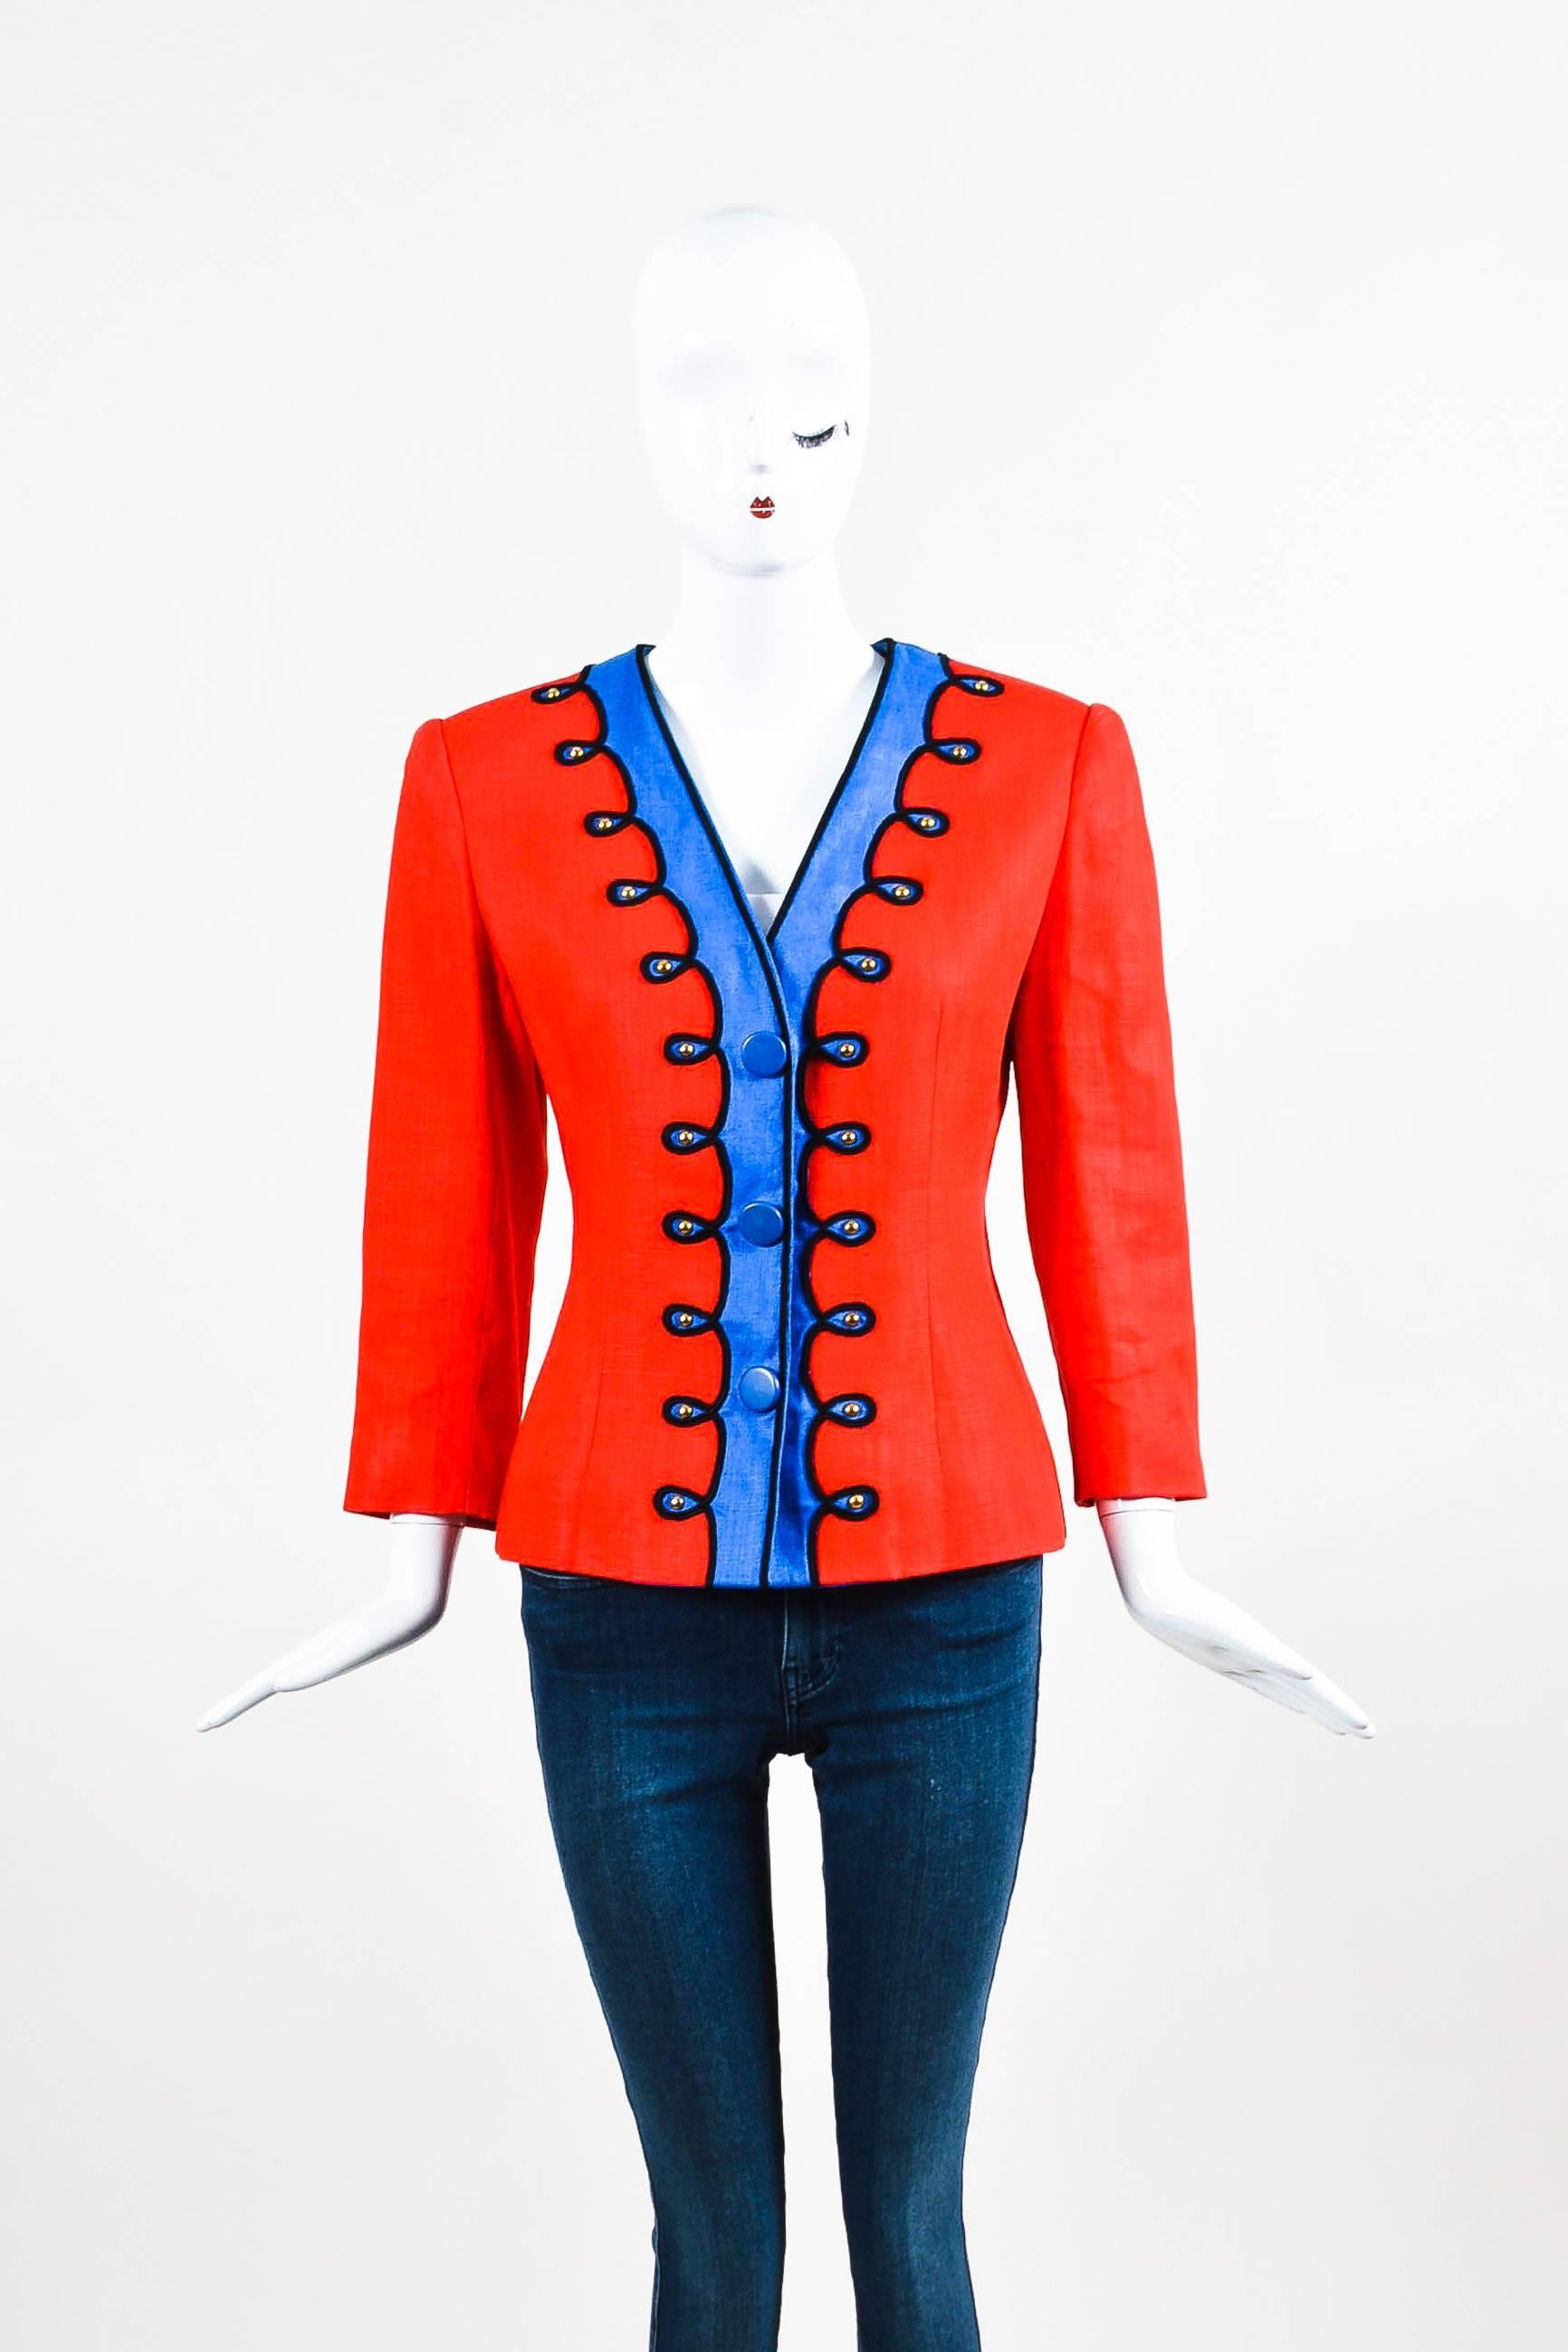 Bright and fun jacket by Givenchy Nouvelle Boutique. This vintage piece has a marching band feel with vibrant hues of red and blue and gold-tone studs. Black embroidered detailing. Large, padded shoulders. Snap front closure with a V neckline.